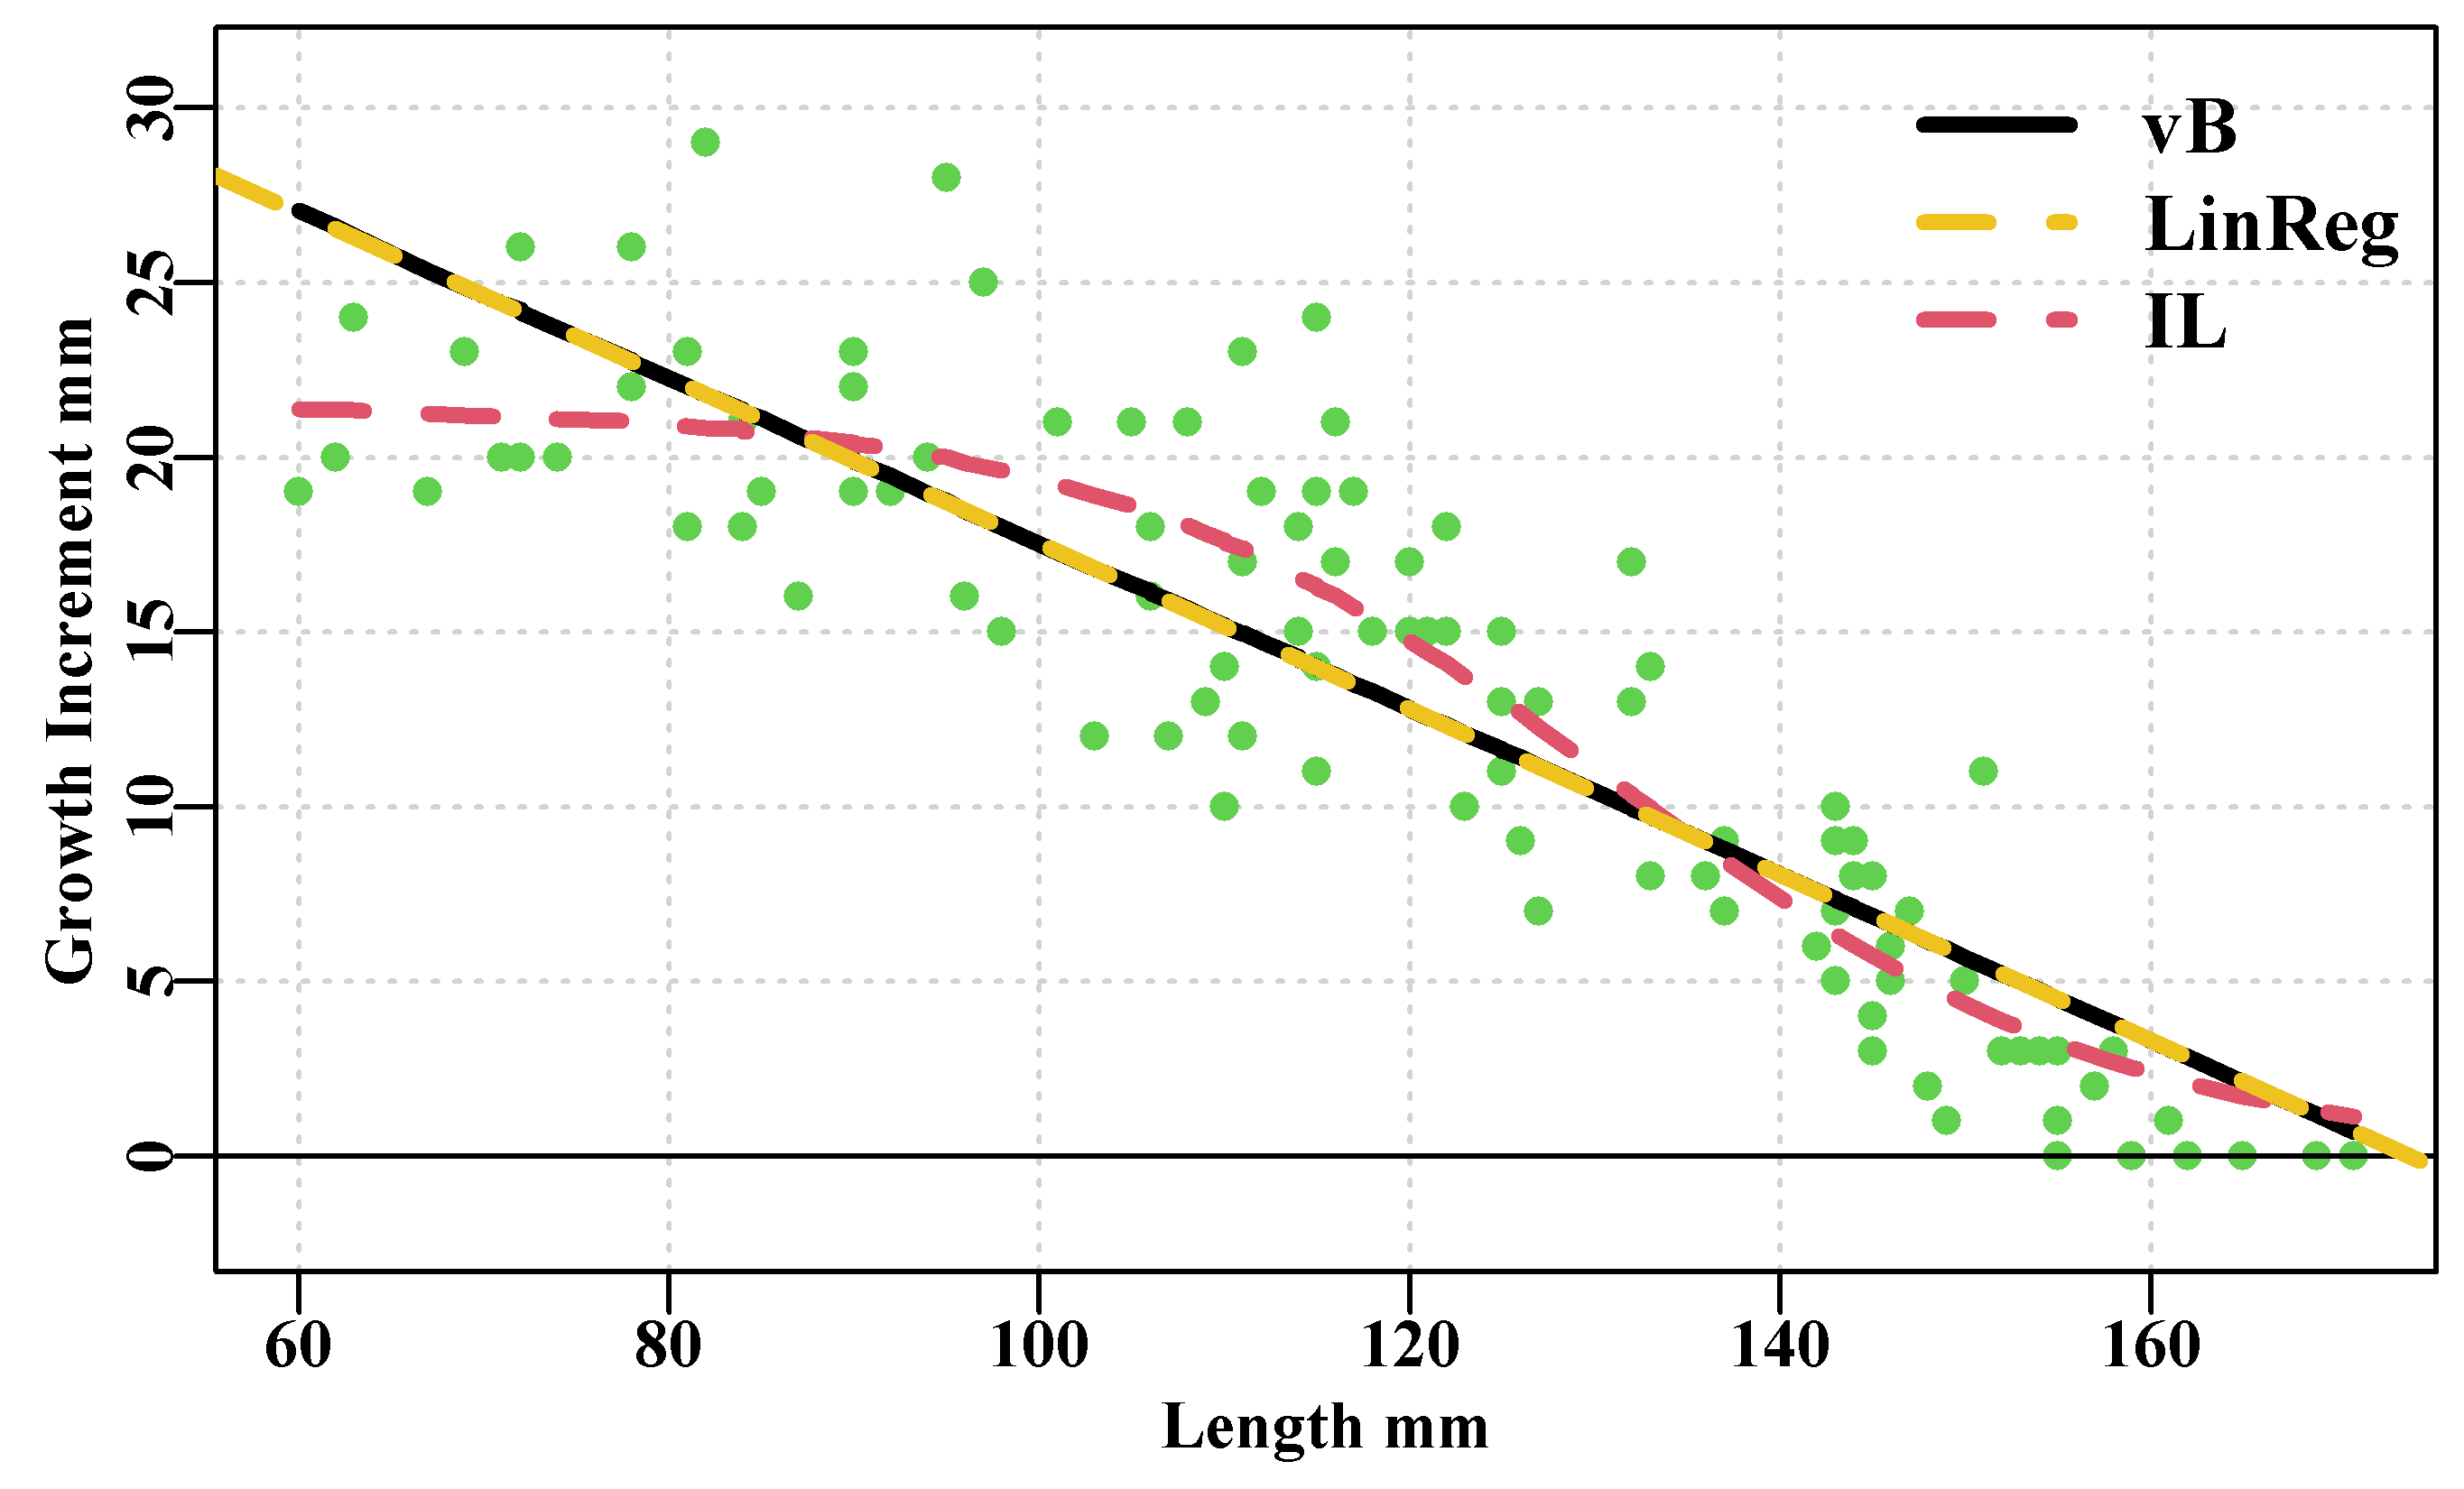 The von Bertalanffy (black), inverse logistic (curved dashed red), and linear regression (dashed yellow) fitted to blacklip abalone tagging data from Black Island. The time interval between tagging and recapture was 1.02 years. Obviously the vB and linear regression are identical.